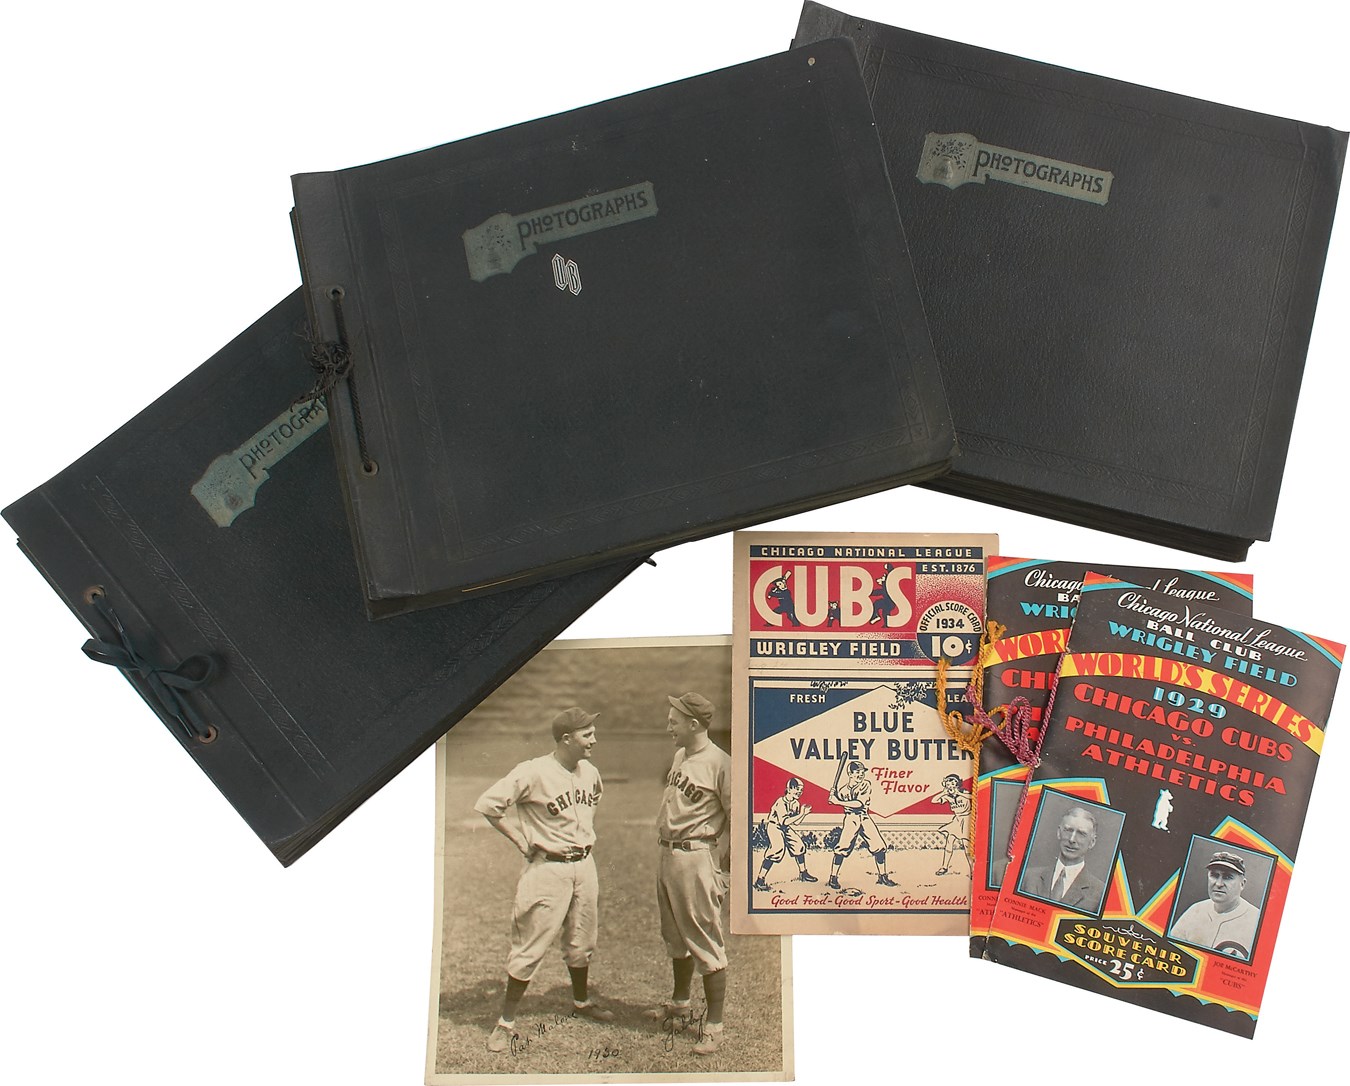 Chicago Cubs & Wrigley Field - 1920s-30s Chicago Cubs Scrapbooks with World Series Tickets, Programs and Autographs